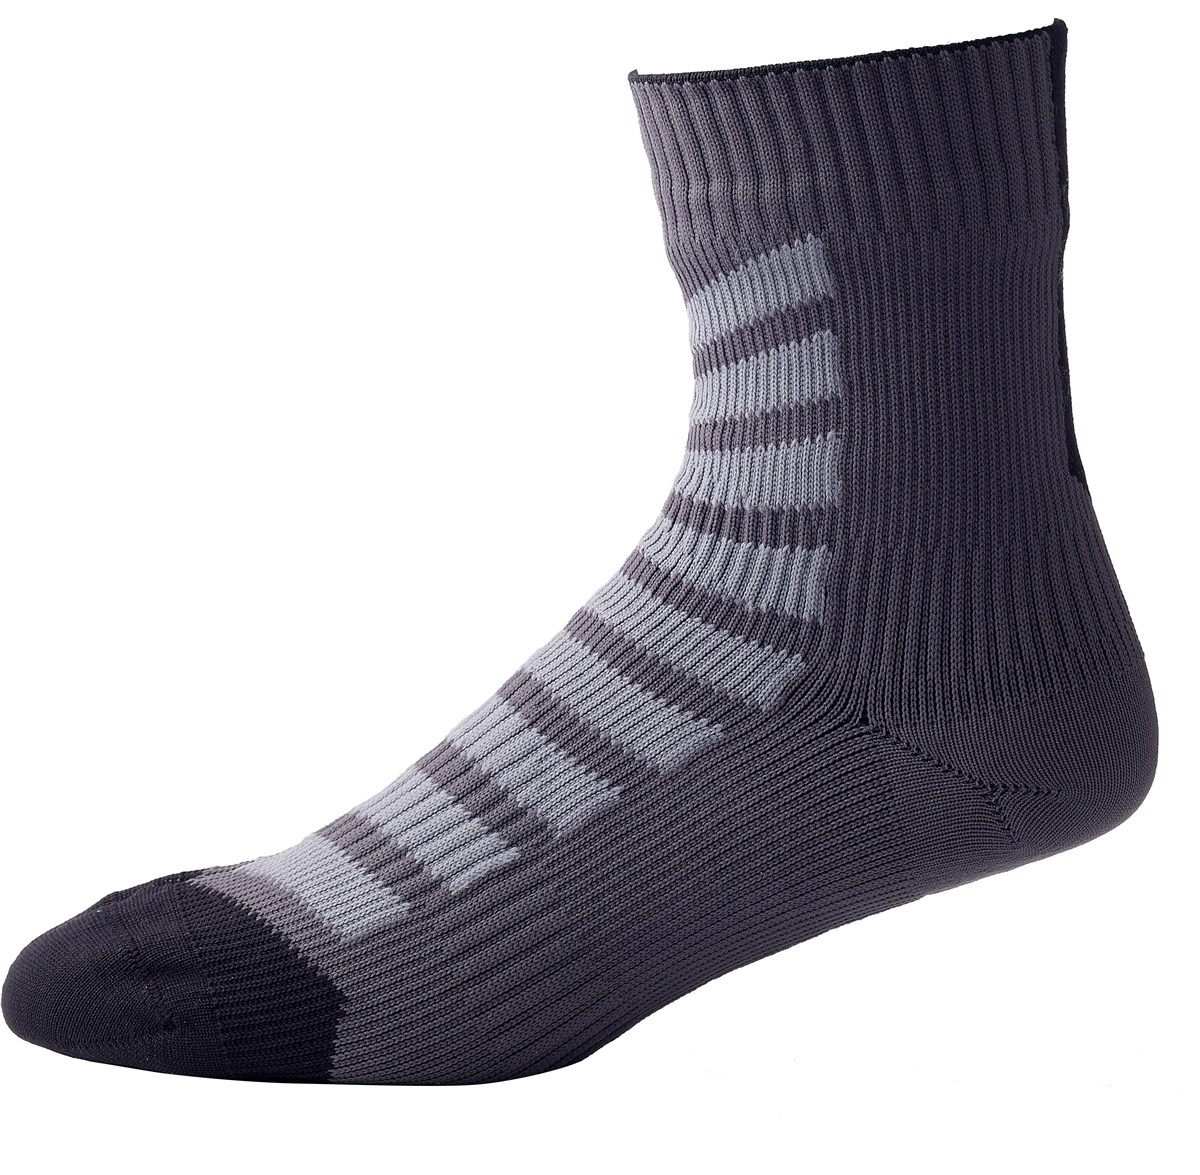 SealSkinz MTB Cycling Ankle Socks with Hydrostop